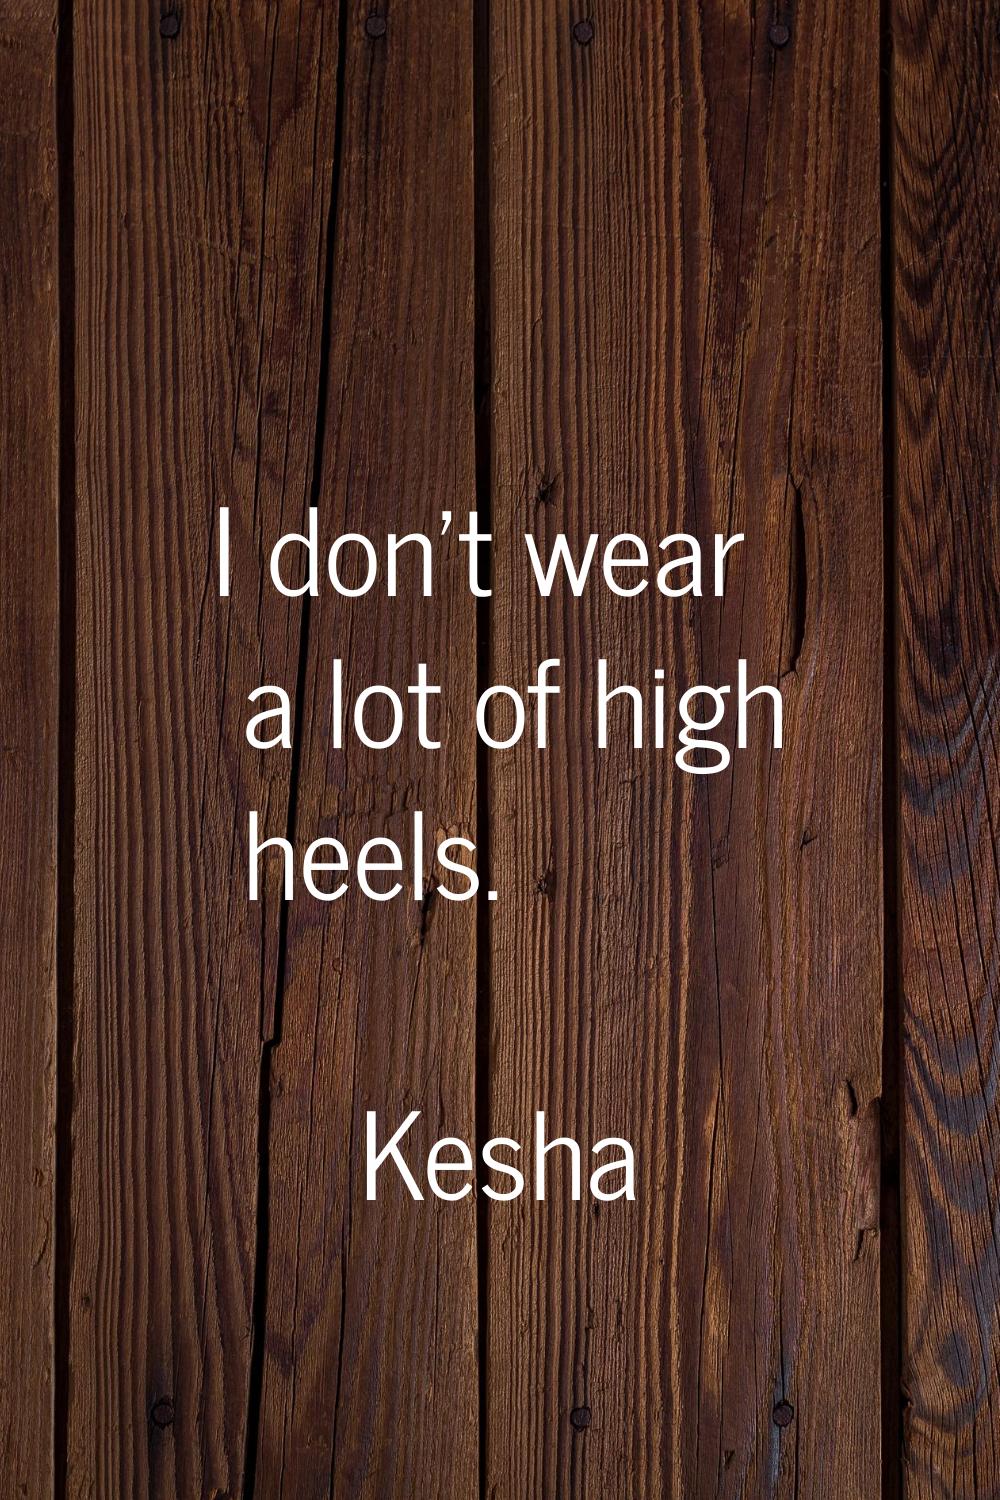 I don't wear a lot of high heels.